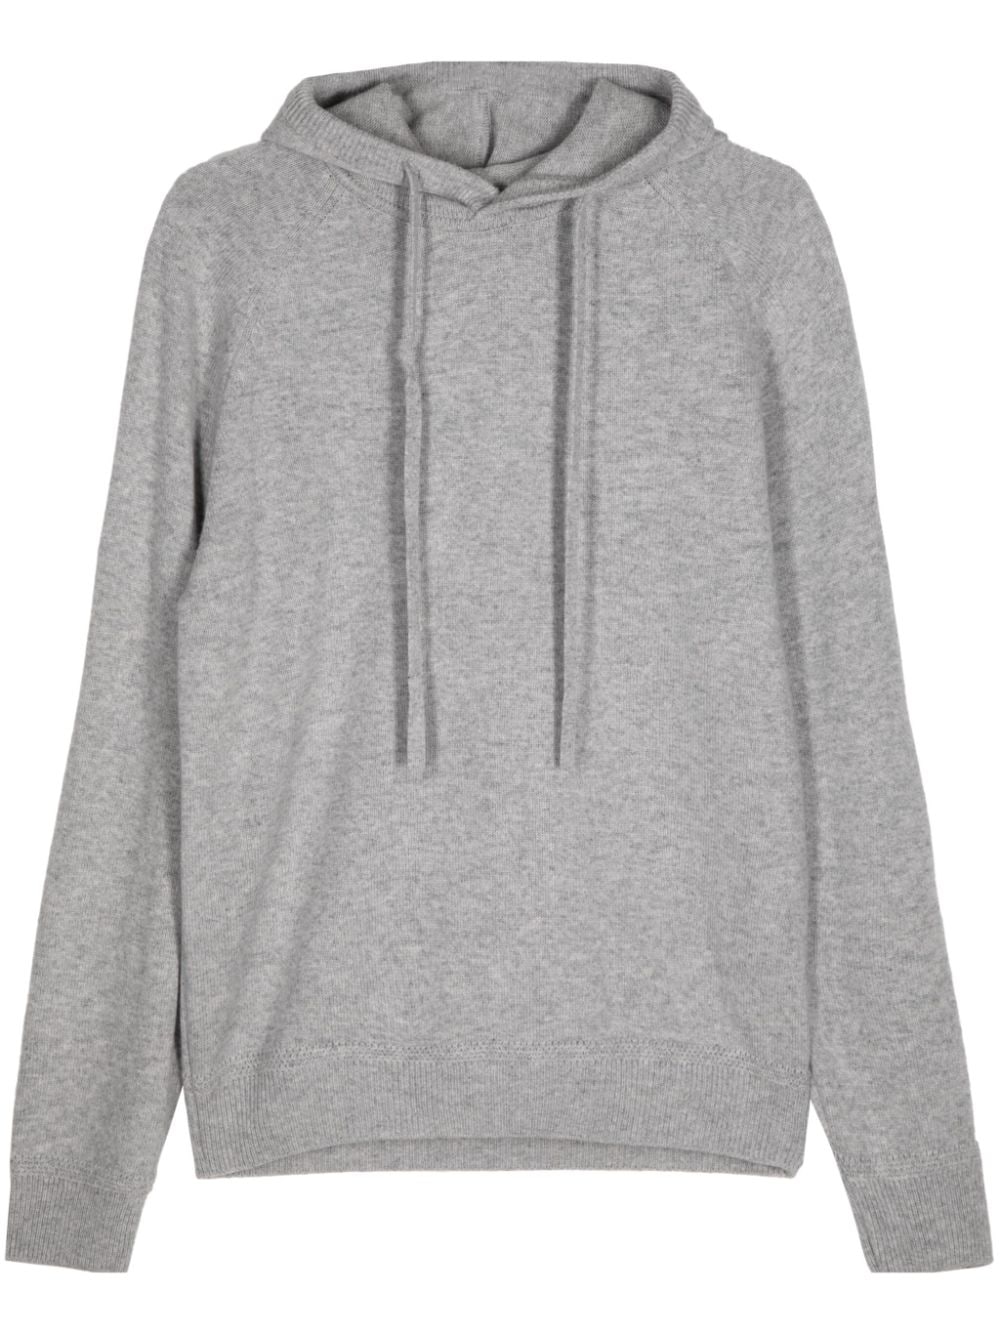 Man On The Boon. Drawstring Cashmere Hoodie In Gray